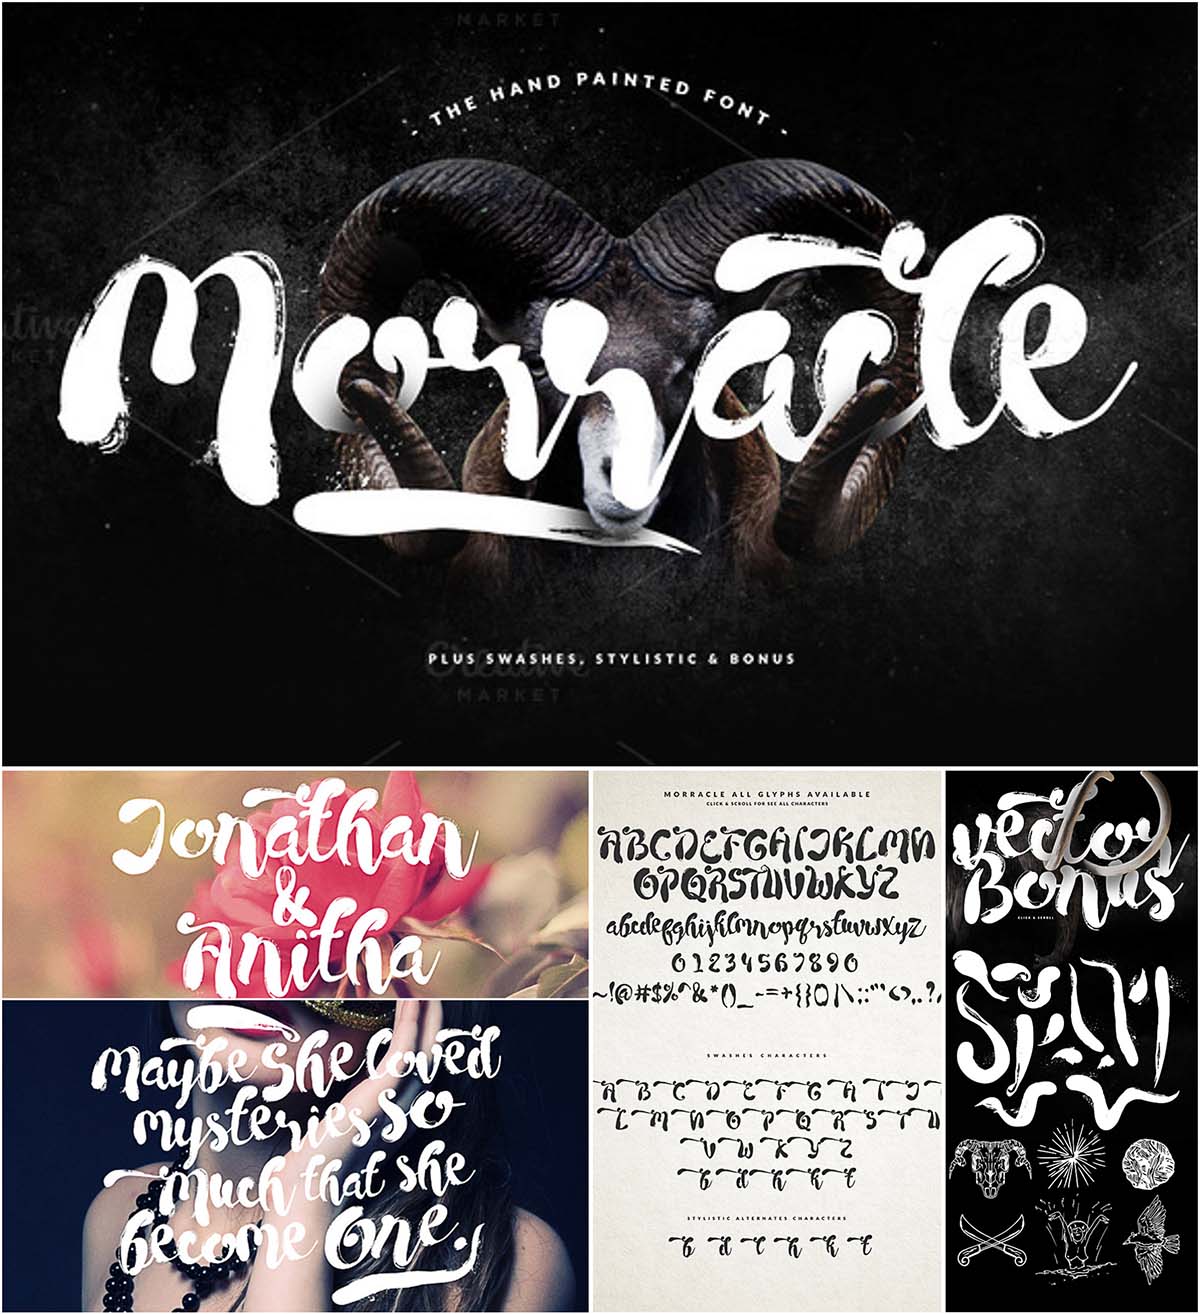 Morracle font with extra